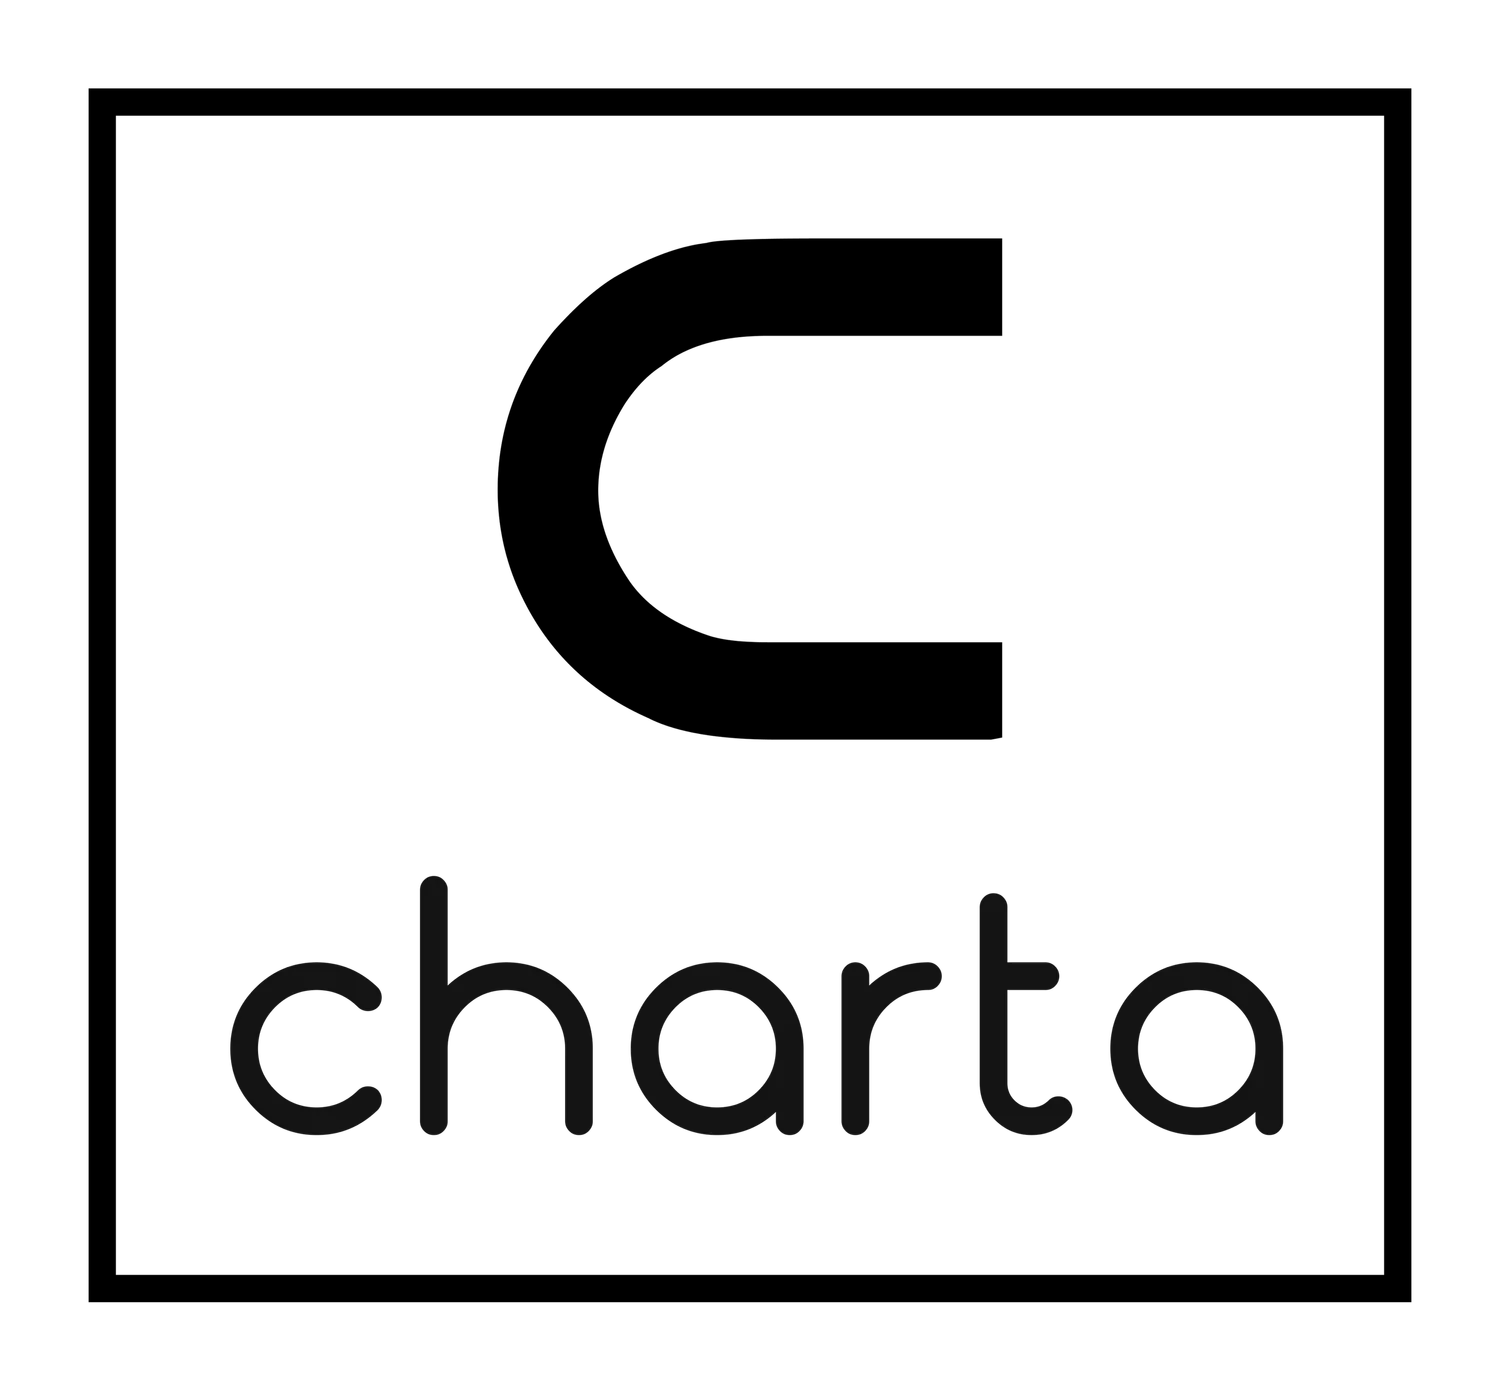 Charta | Brands - Paragon Consulting